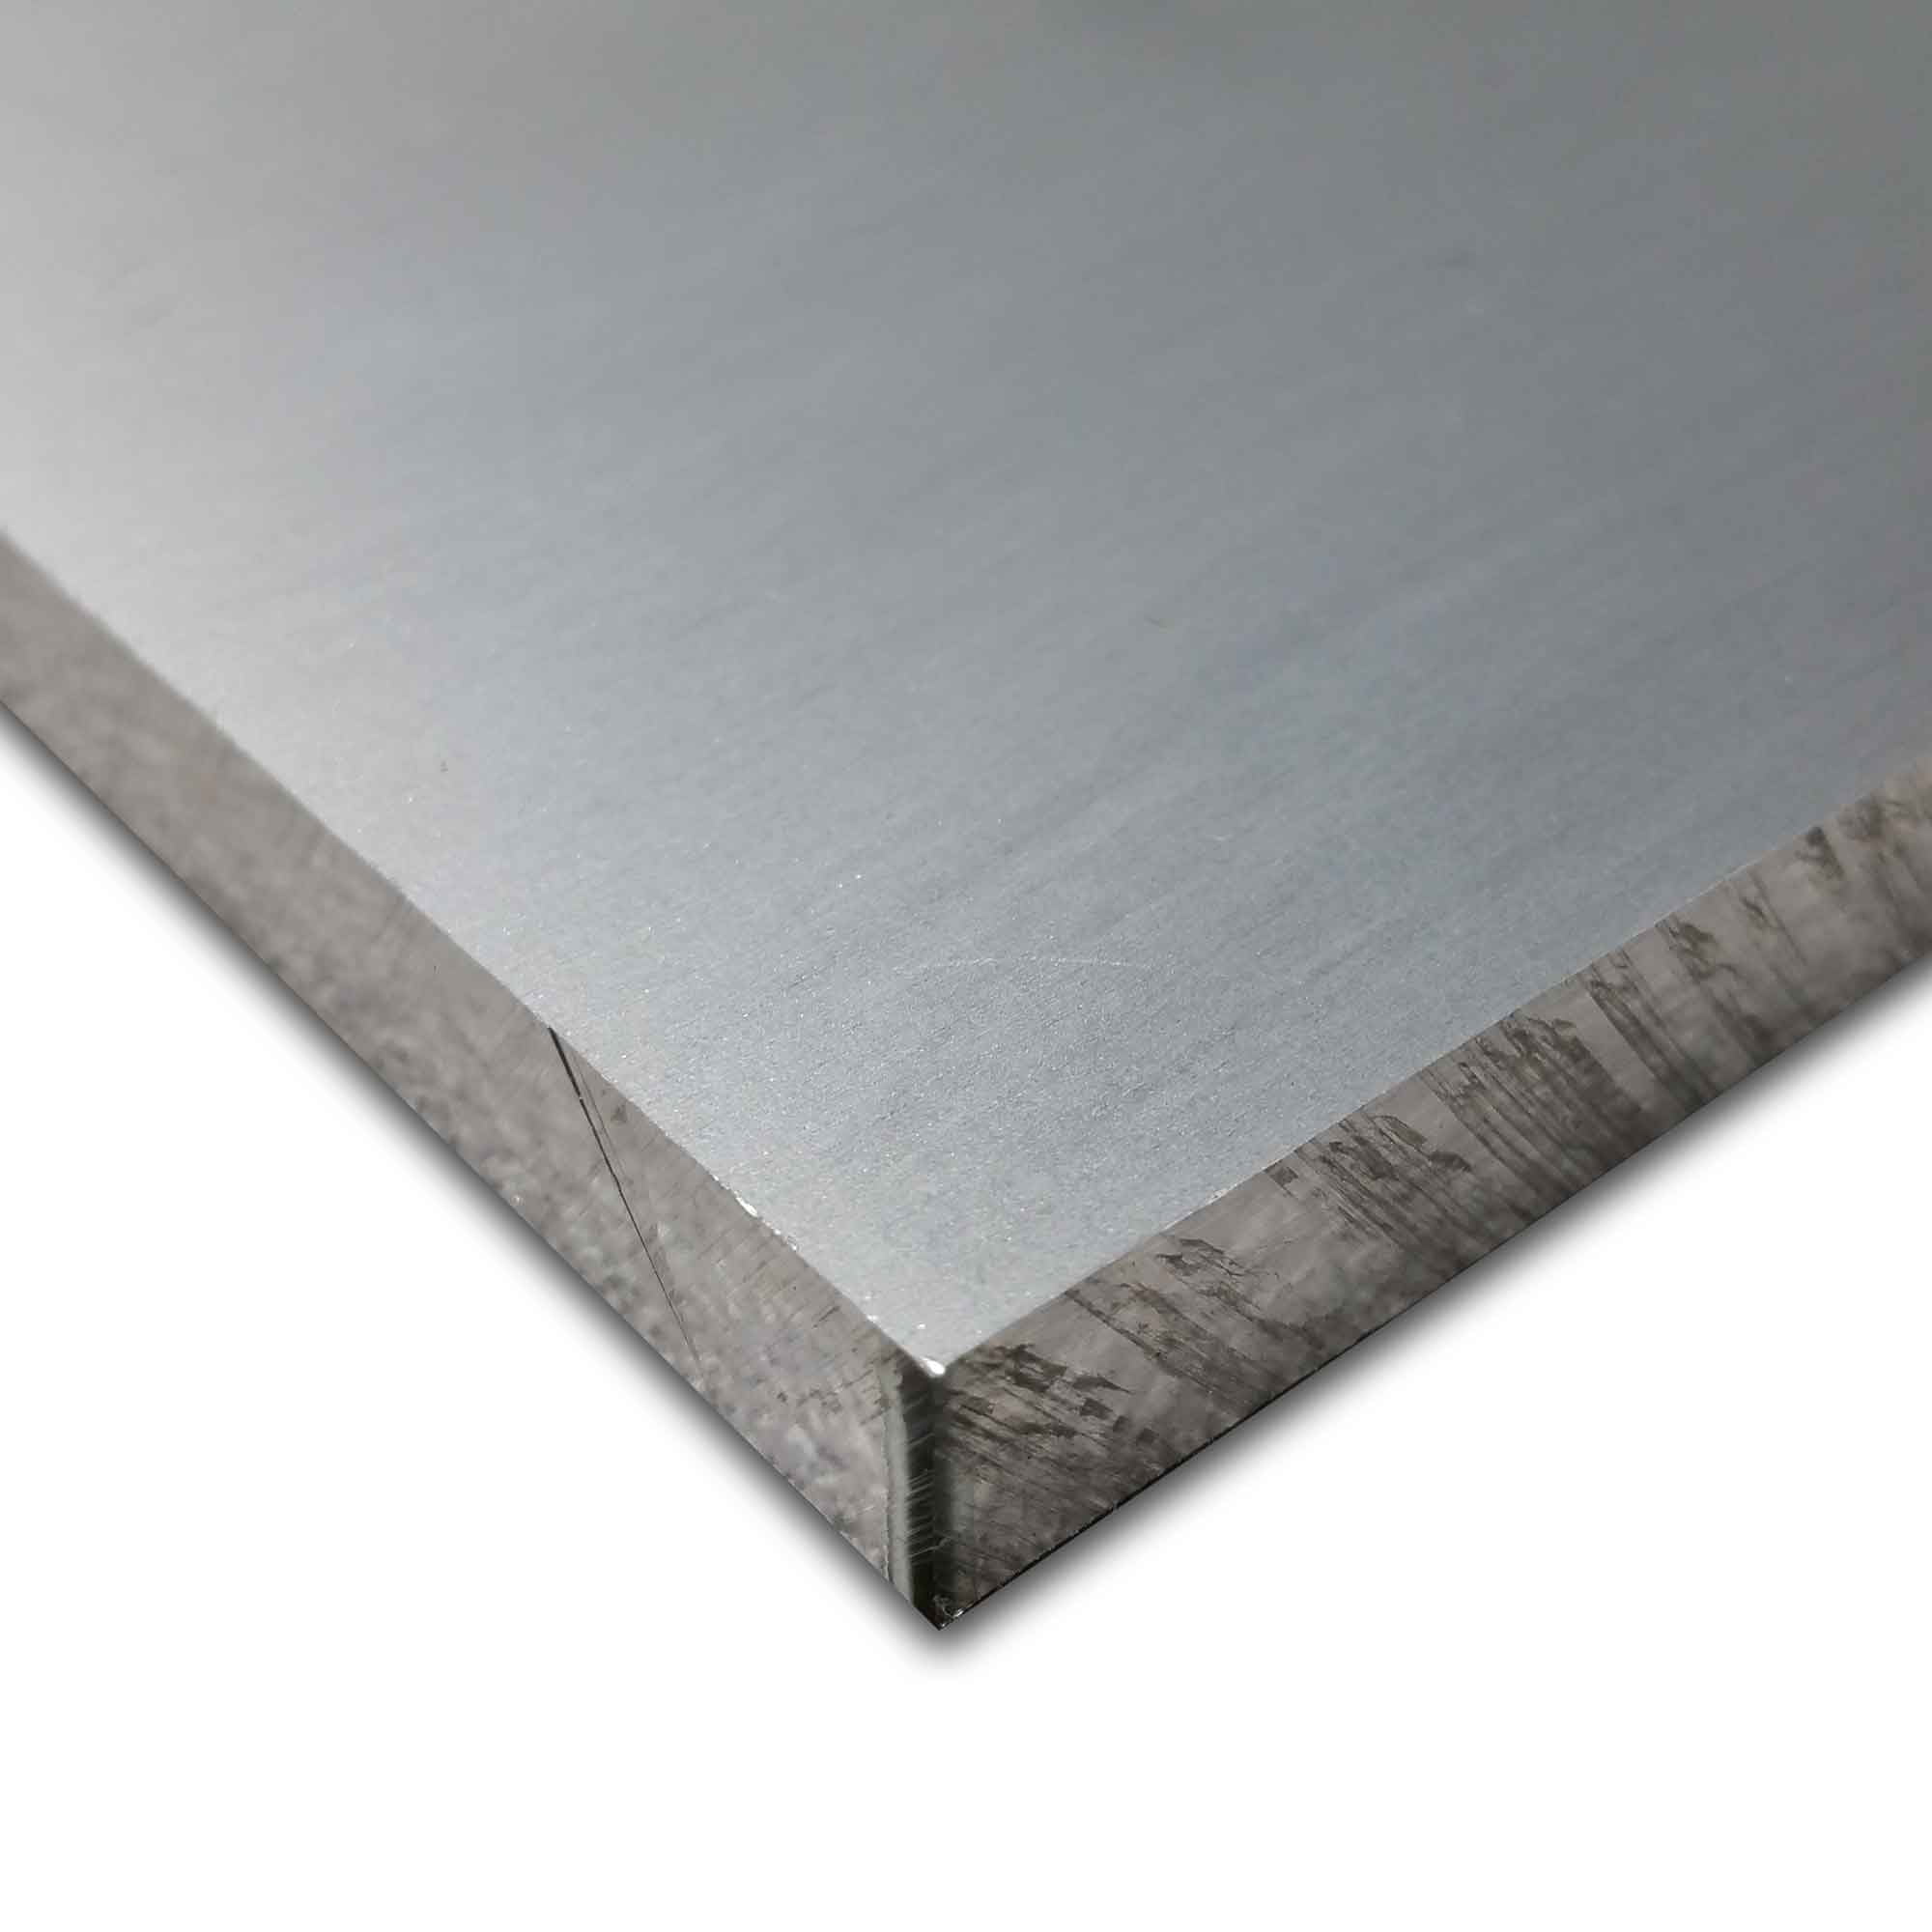 Eowpower 6061 T6 Aluminium Sheet Metal 12 x 12 x 1/4 Inch Covered with Protective Film Thickness 6mm Heat Treatable Rectangle Flat Plain Metal Plate Panel Finely Polished and Deburred 